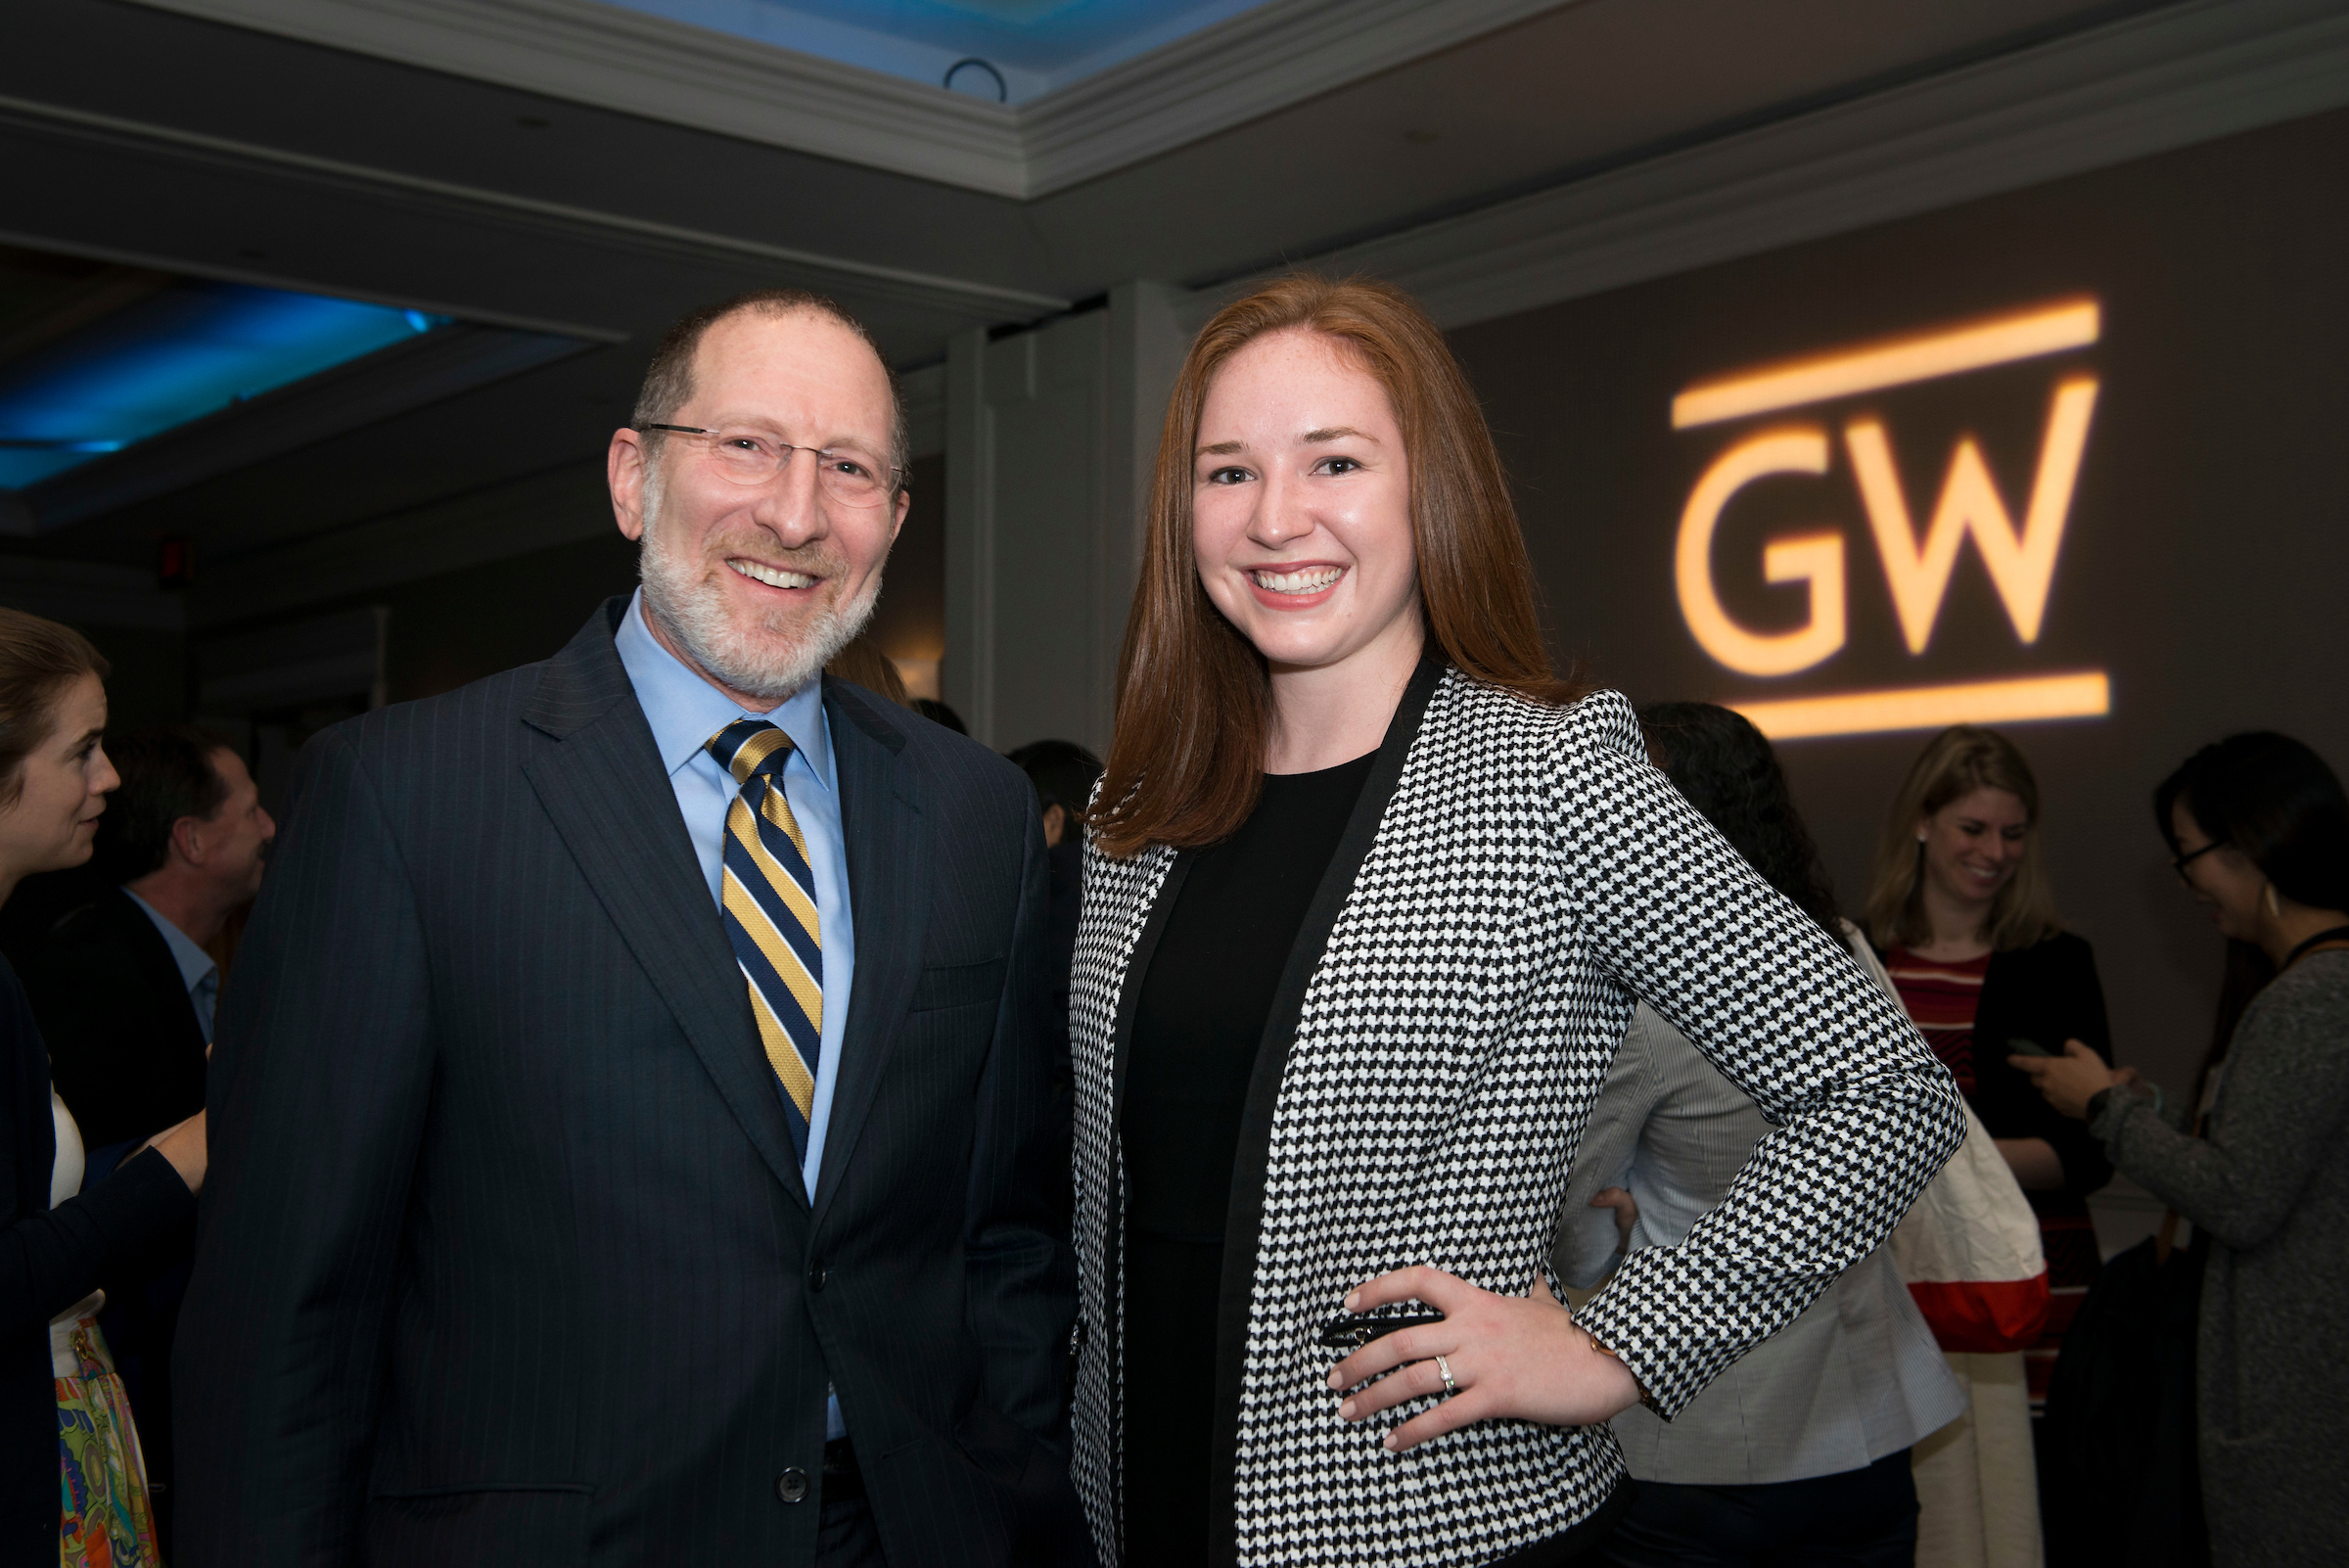 GW Law professor Steven Schooner (l) and Victoria Dalcourt Angle at the 2019 Power & Promise Dinner. Ms. Dalcourt Angle receives